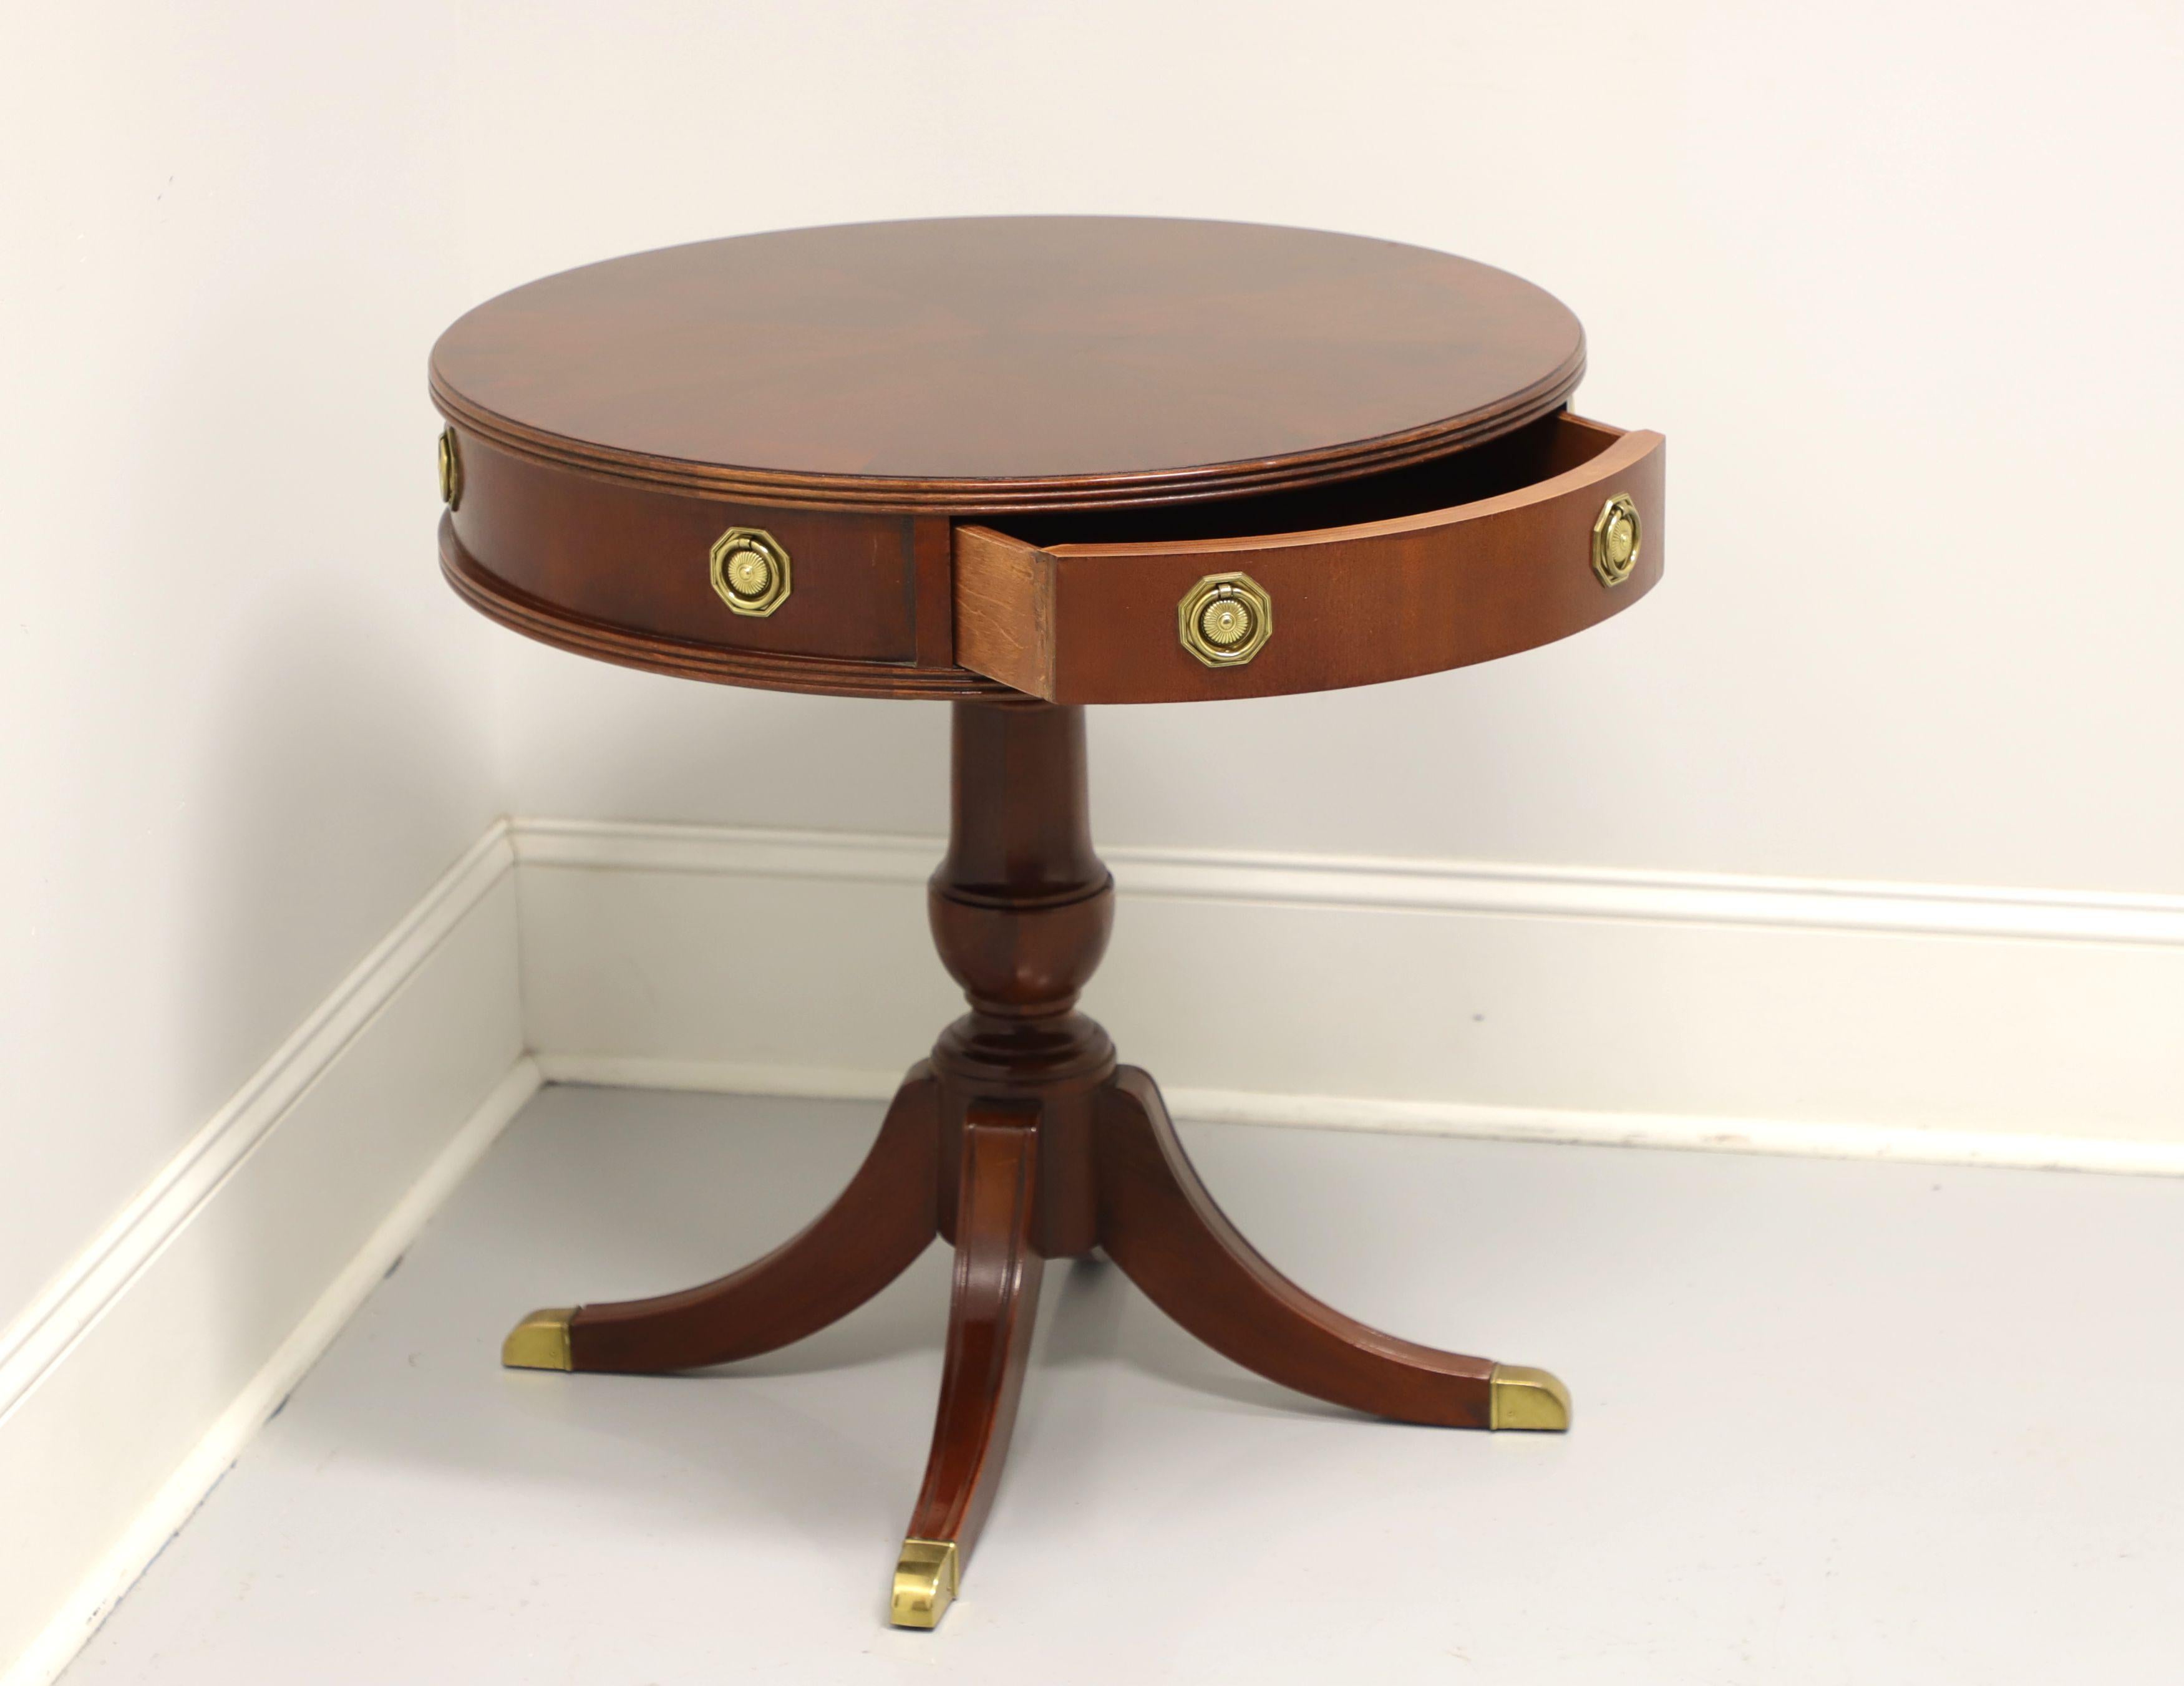 Vietnamese HAMMARY Banded Inlaid Mahogany Round Drum Table with Pedestal Base